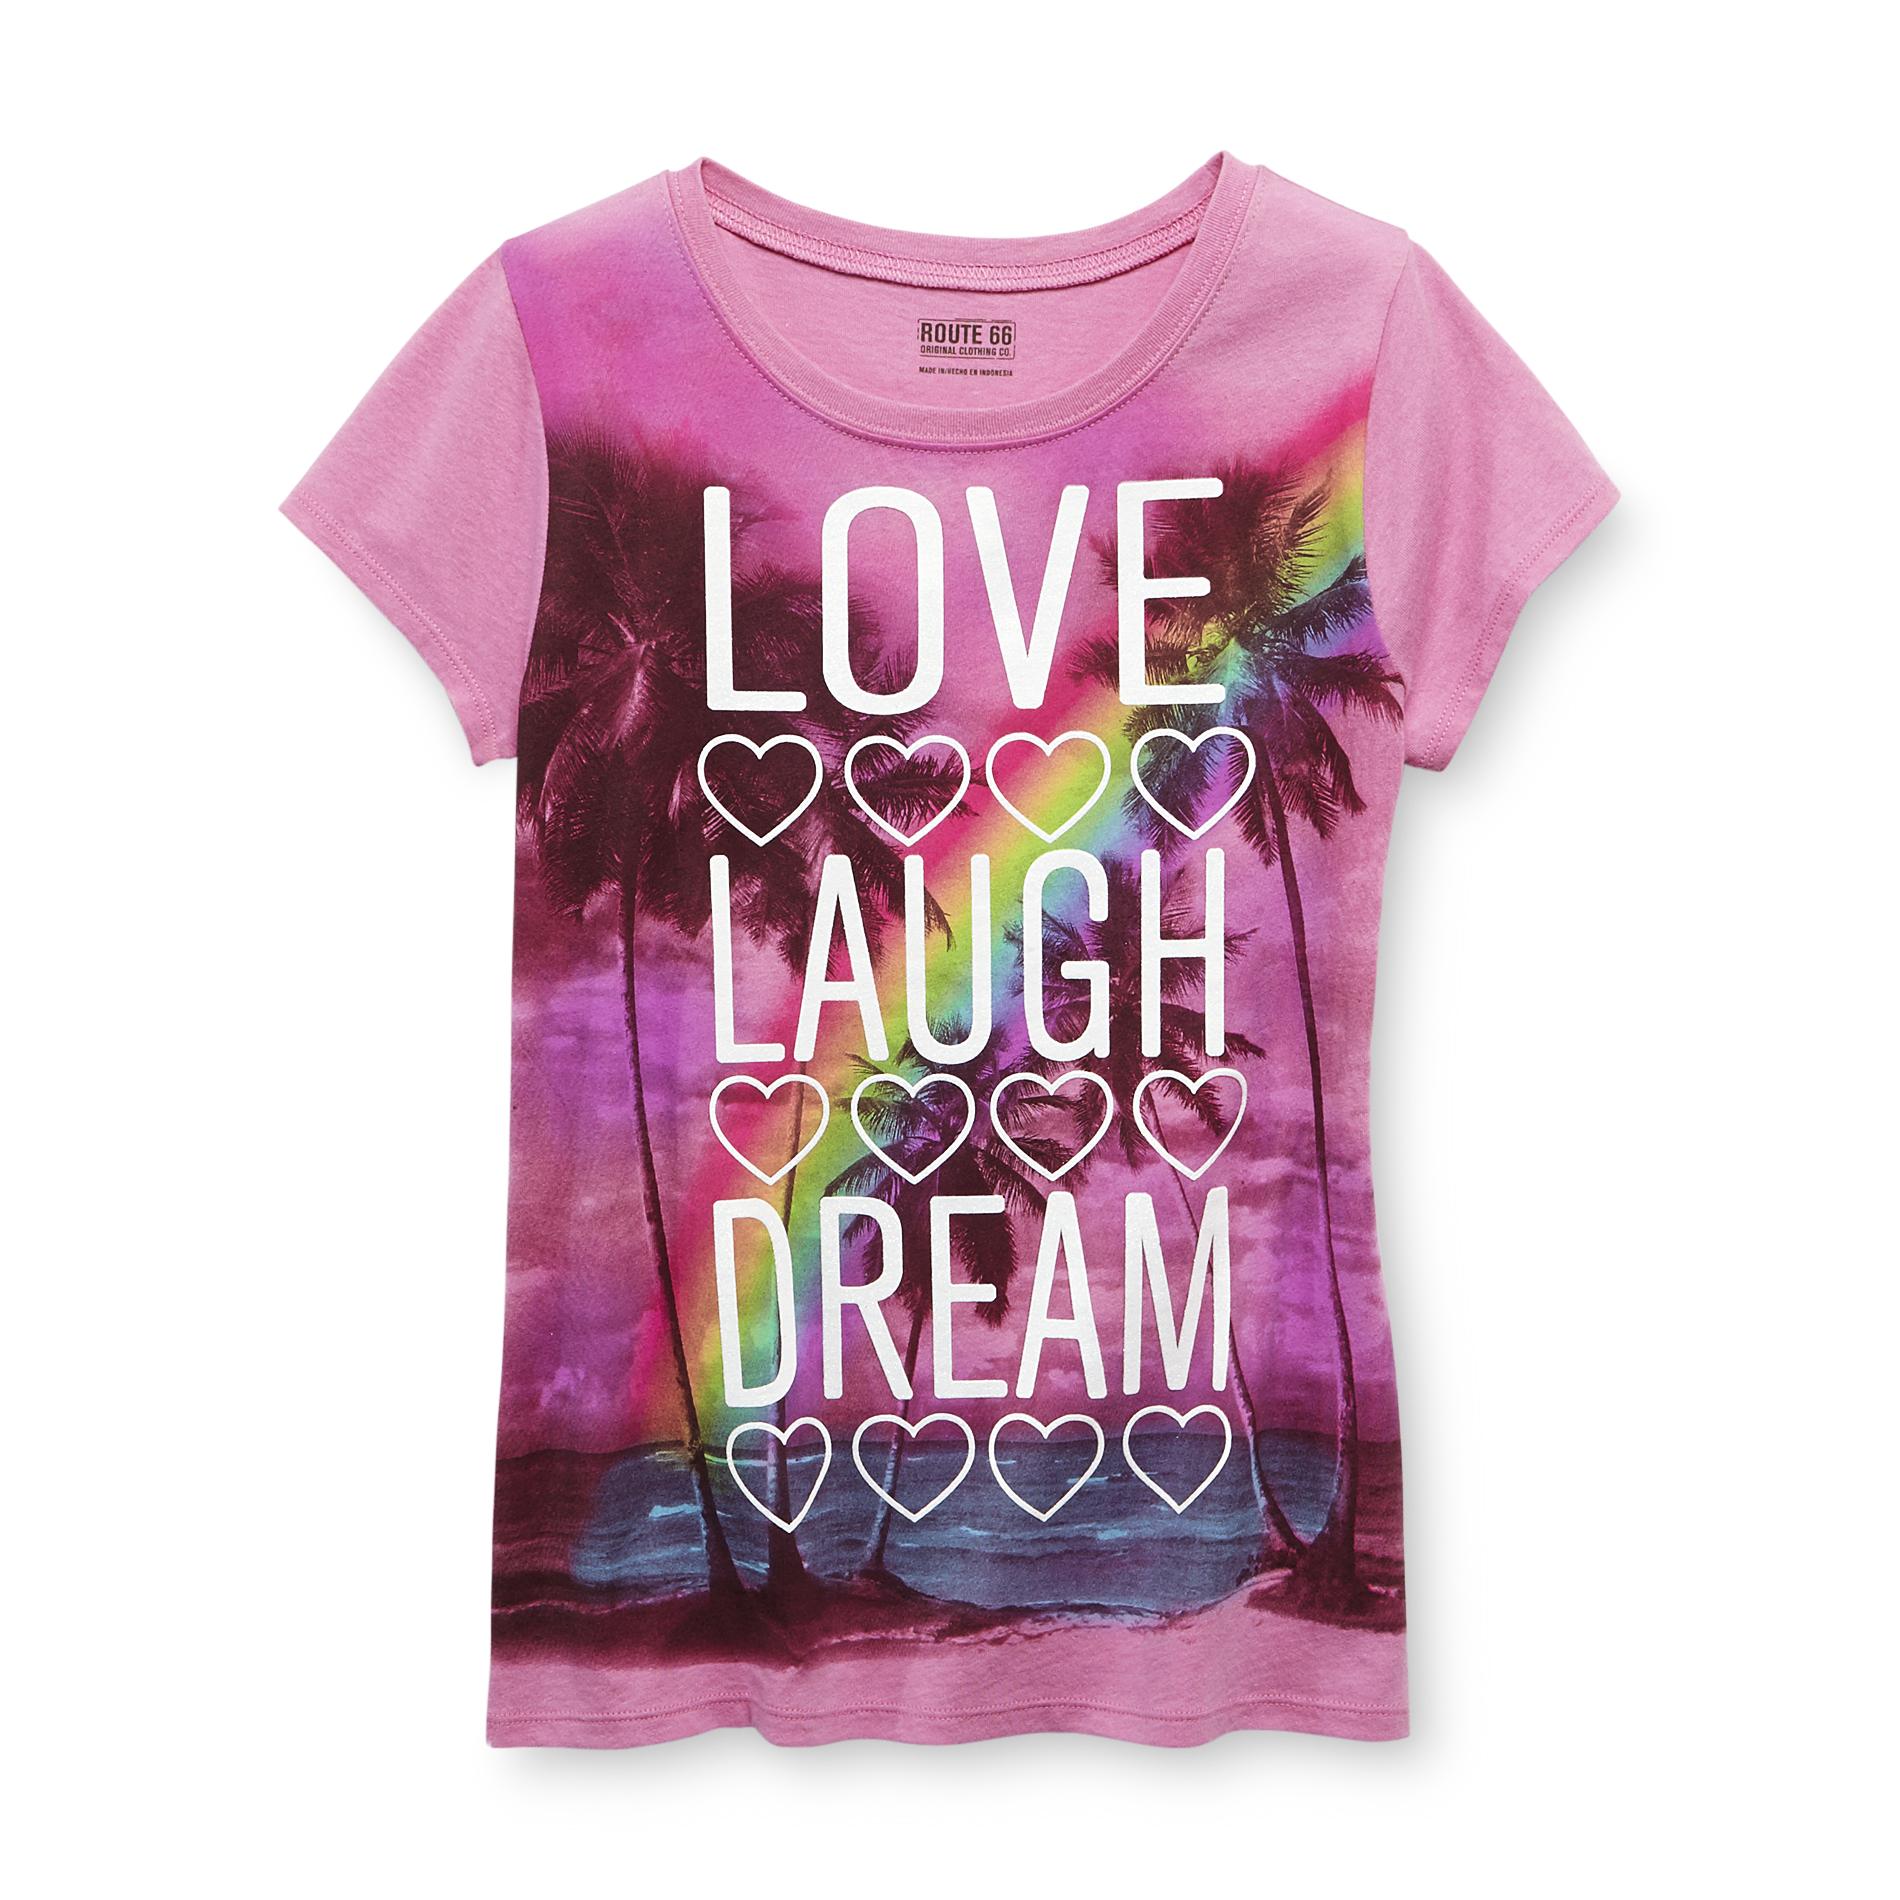 Route 66 Girl's Graphic T-Shirt - Love  Laugh  Dream